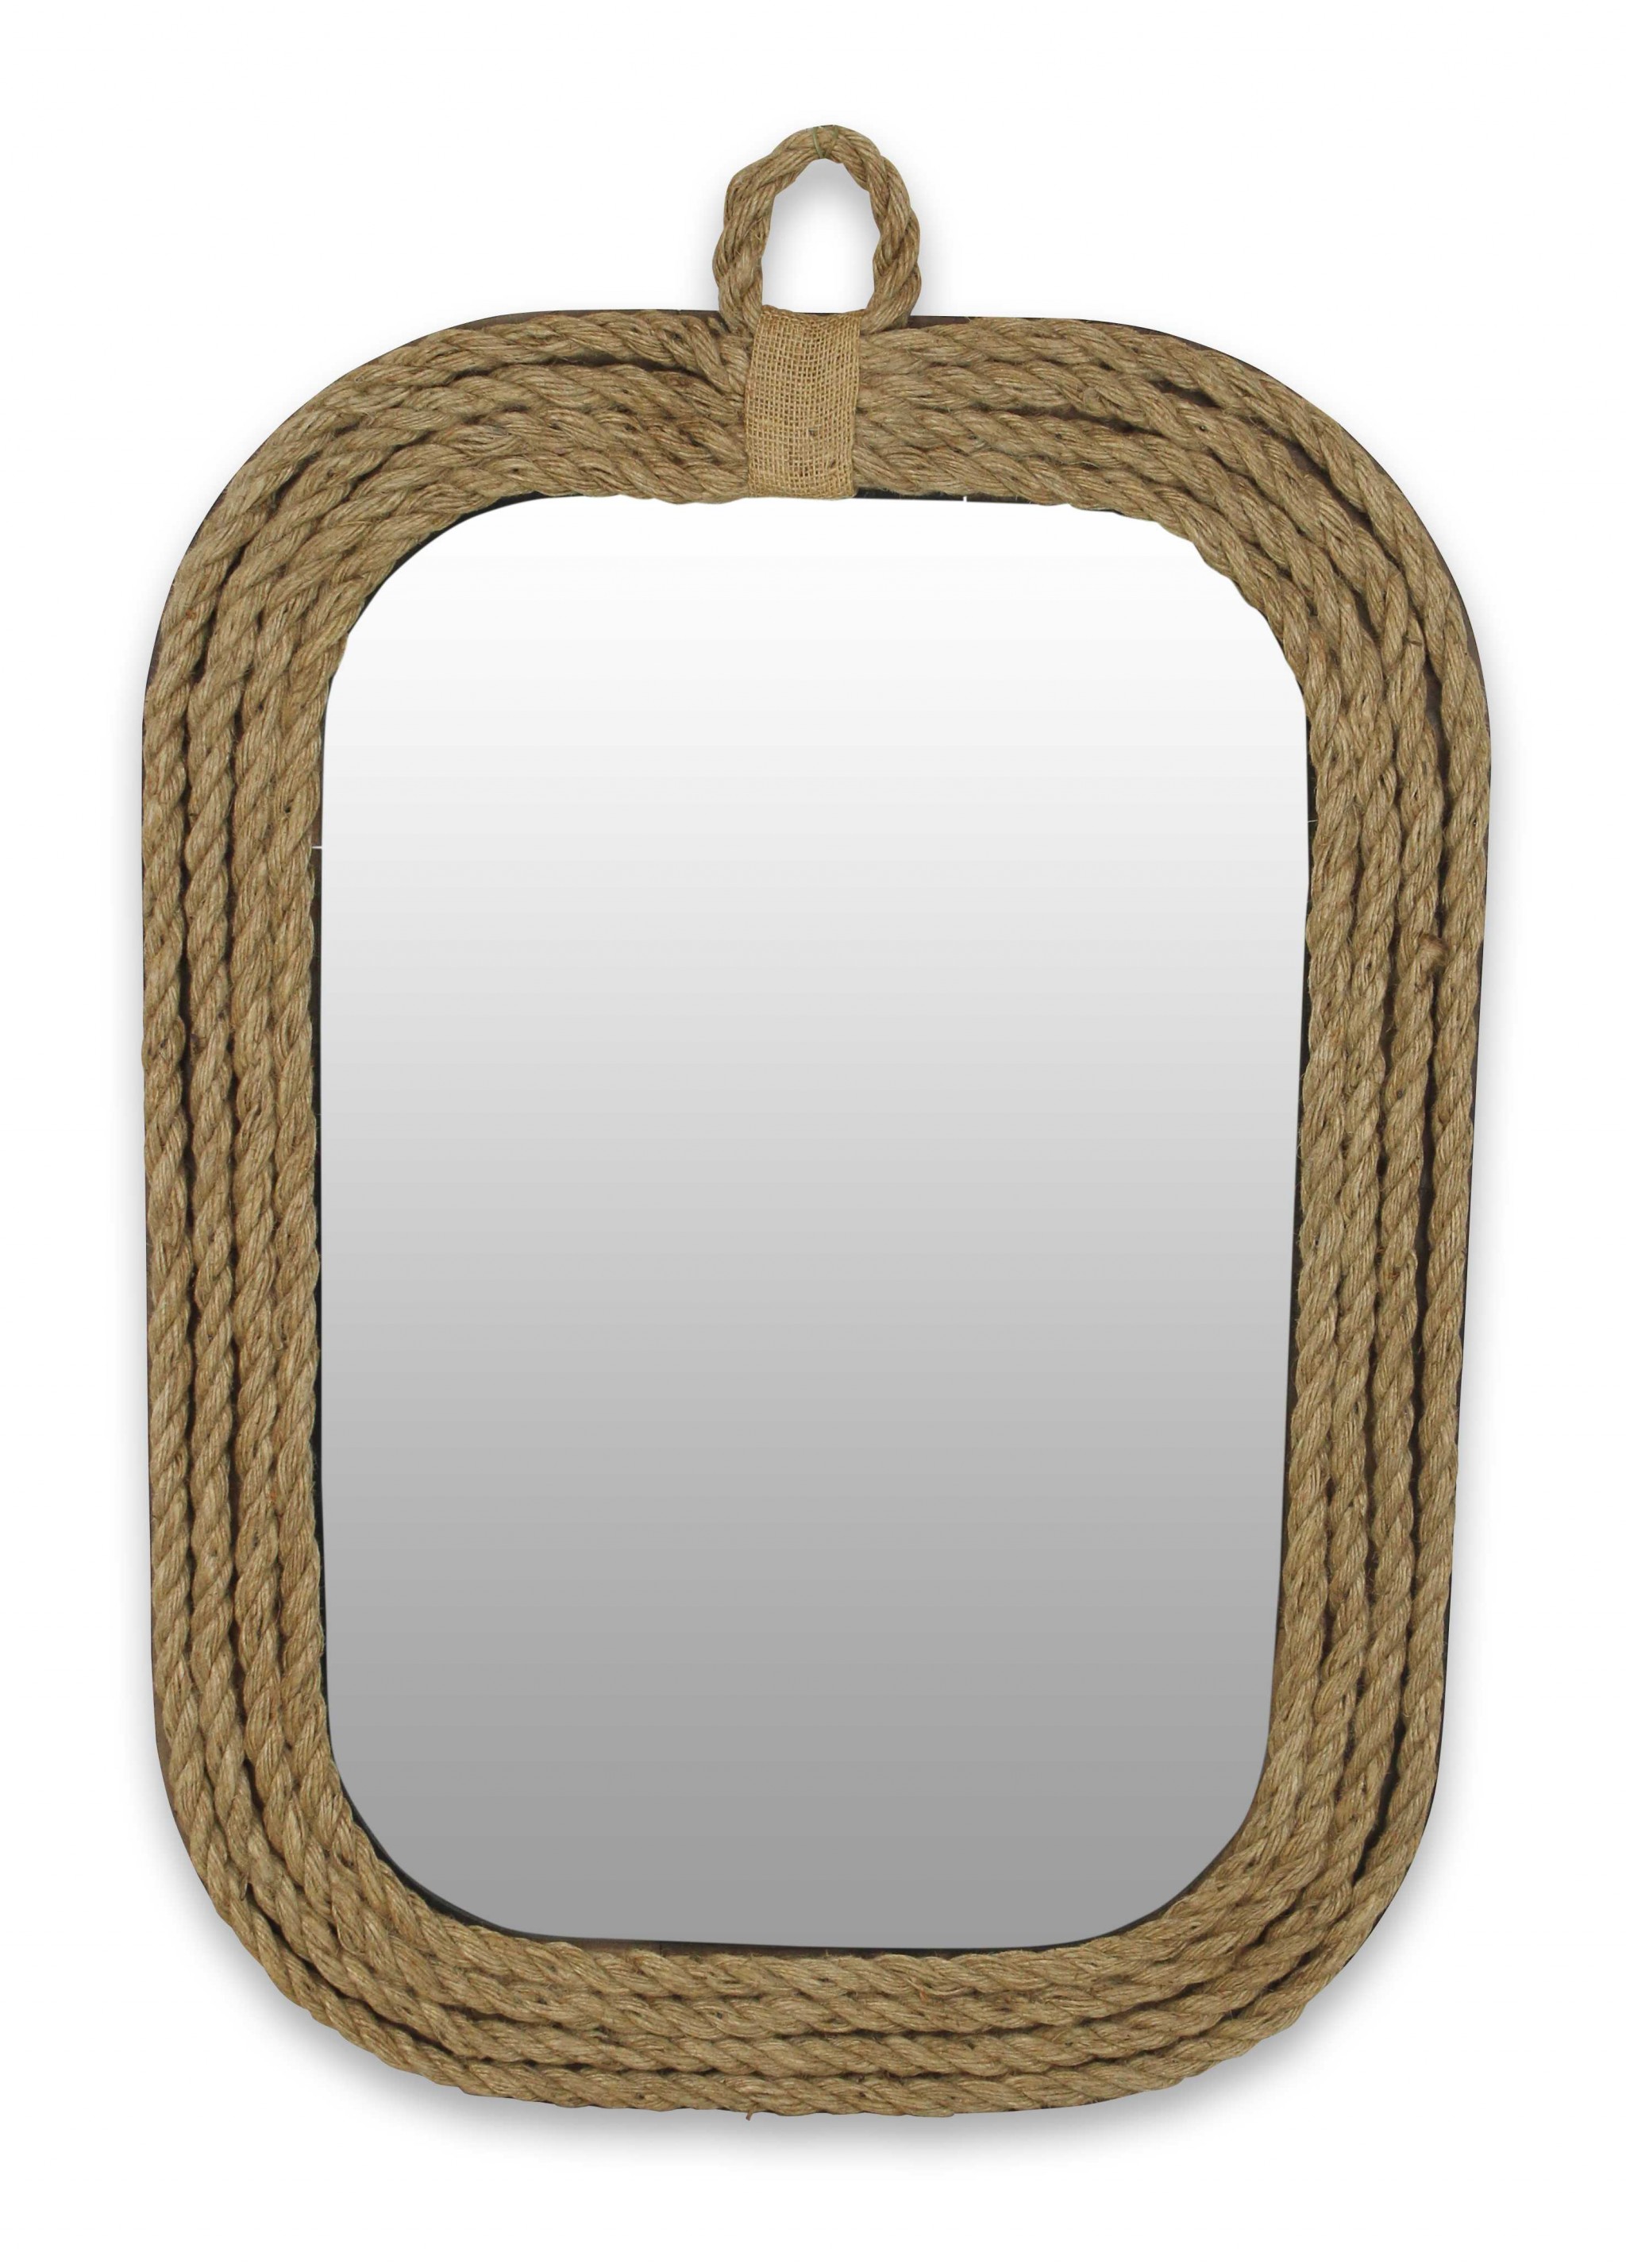 Brown Rounded Rectangular Shaped with Nautical Rope Frame Wall Mirror